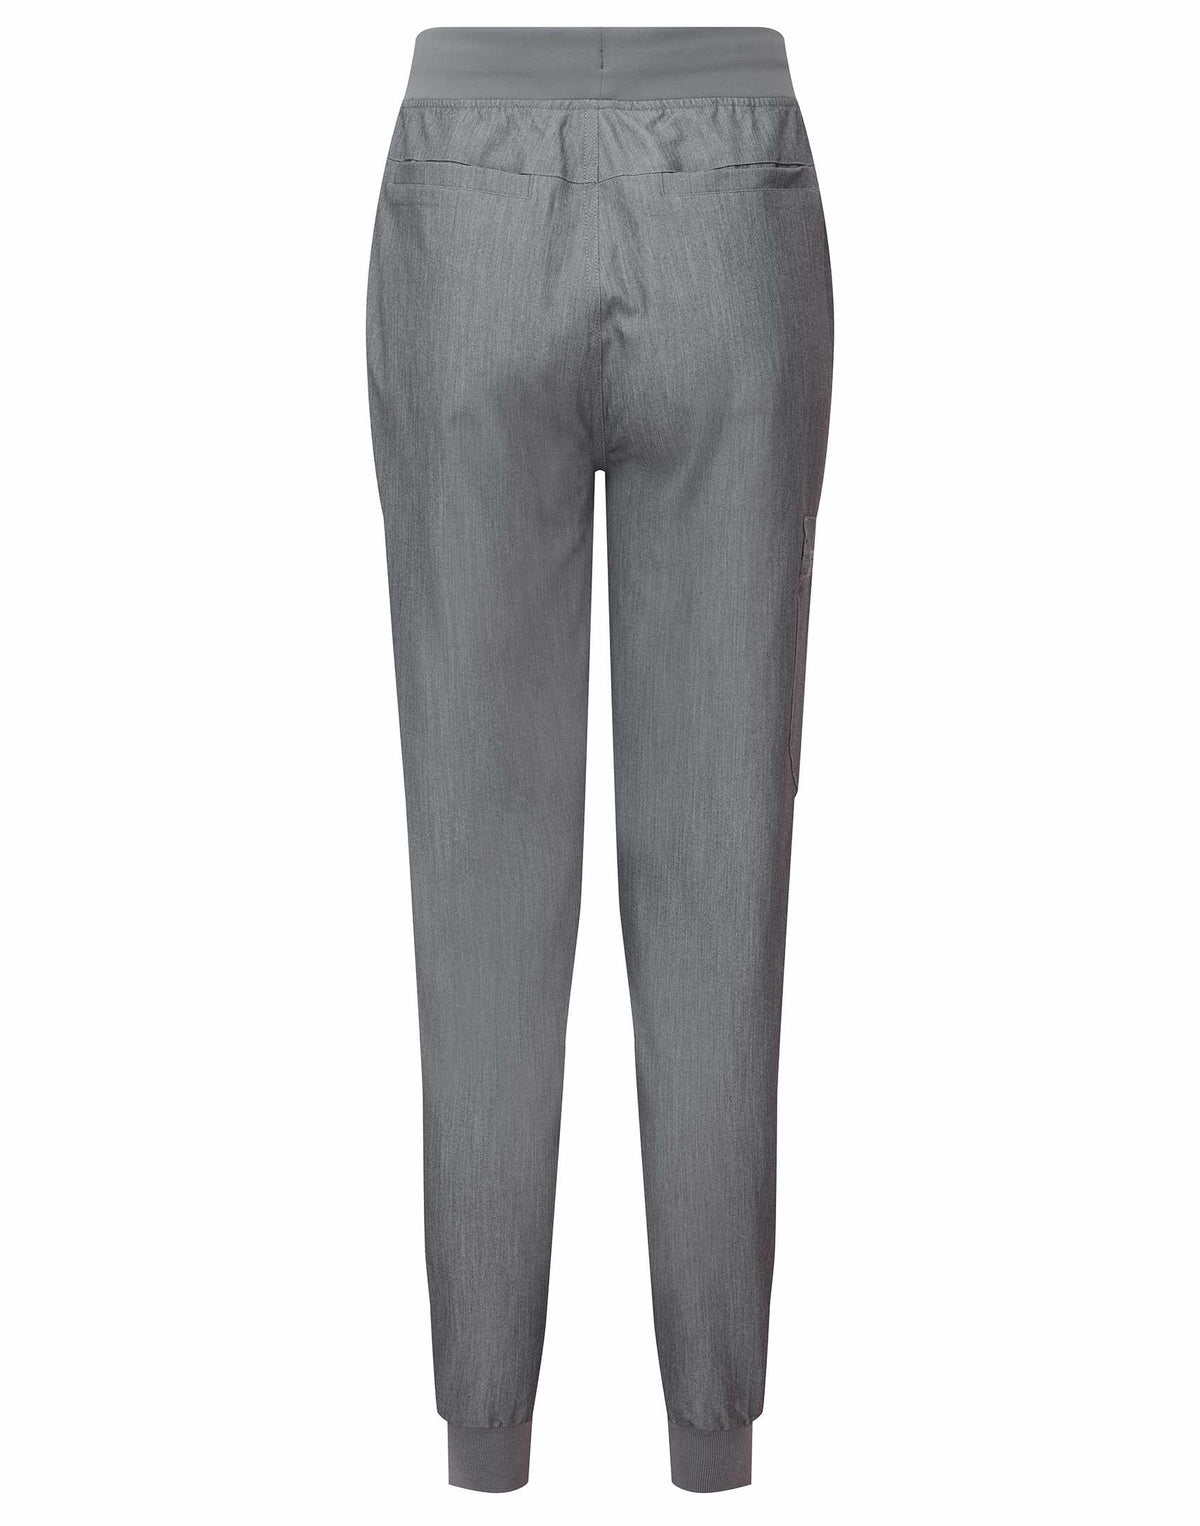 Onna Energized Women's Healthcare trousers